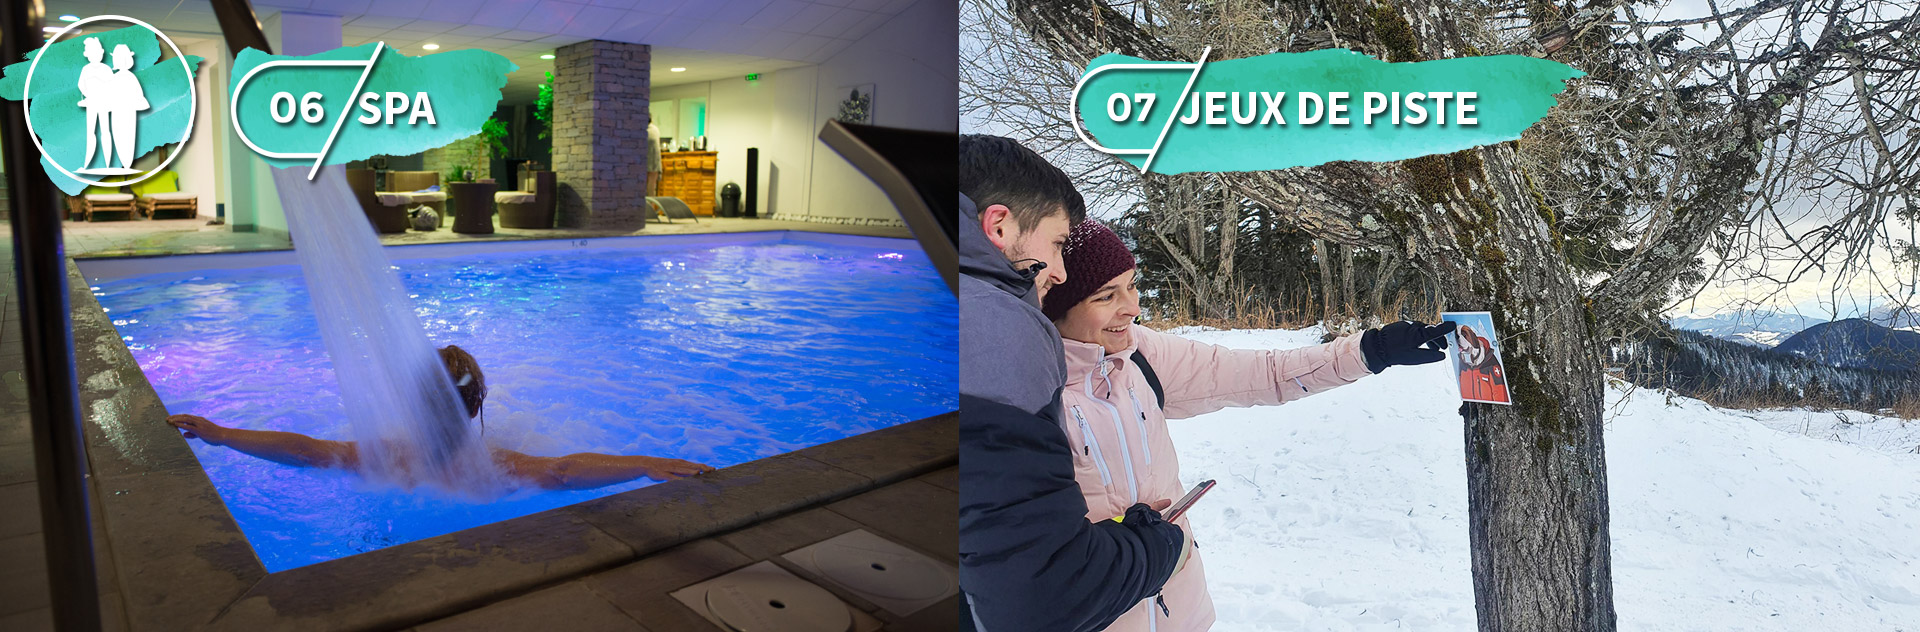 Chamrousse top 10 must-see winter couple spa hot tub paper chase mountain ski resort grenoble isere french alps france - © Spa les Bains /  MG - OT Chamrousse